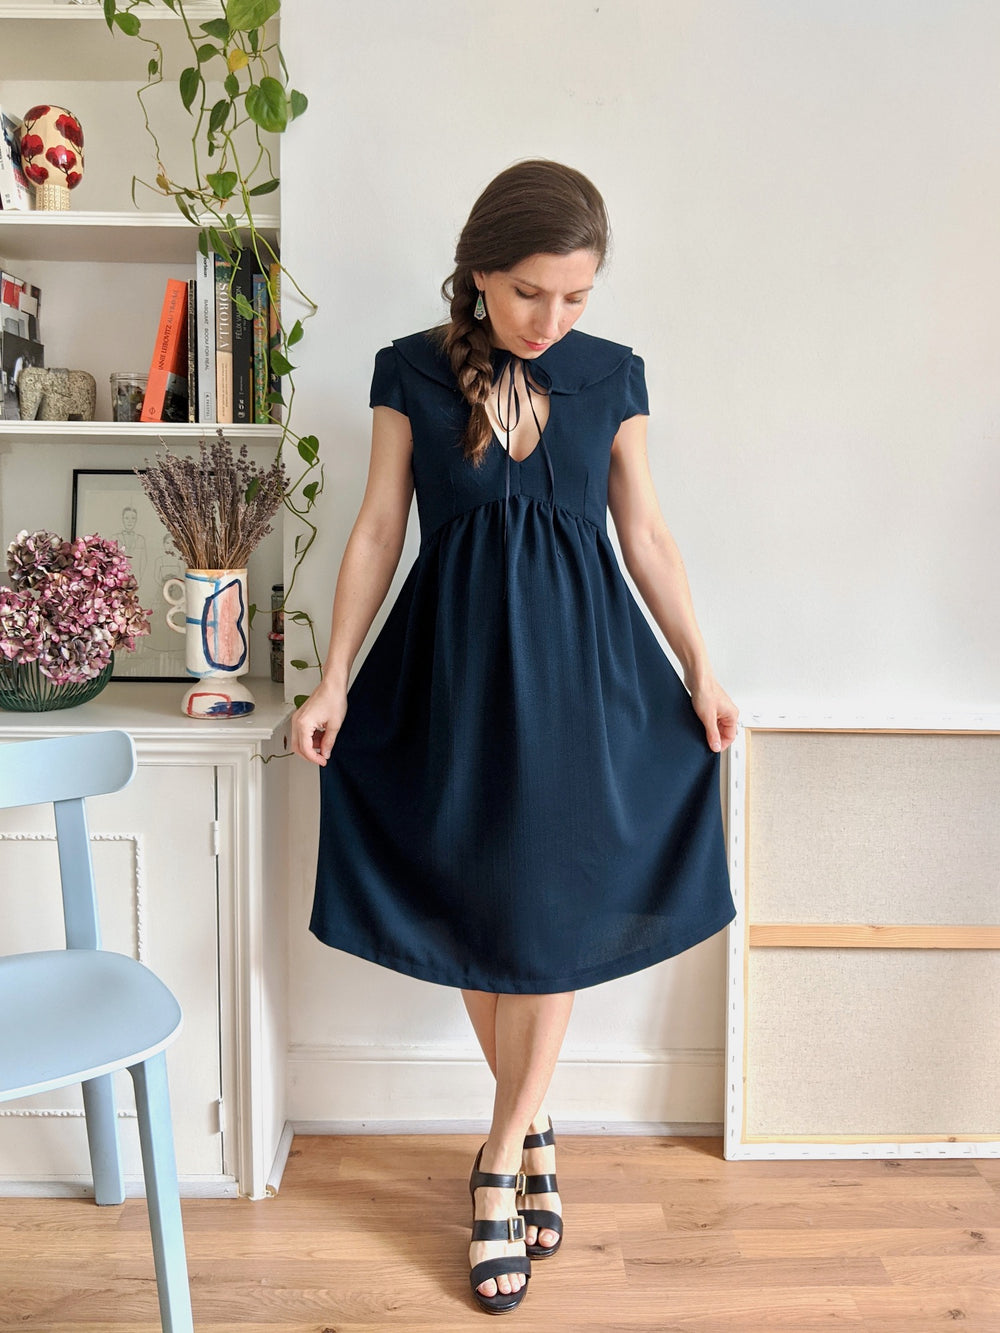 Woman wearing the Paulette Dress sewing pattern by Camimade. A dress pattern made in crepe, viscose, rayon, cotton lawn or cotton sateen fabrics, featuring a Peter Pan collar, front keyhole, cap sleeves and a gathered skirt that is pregnancy friendly due 